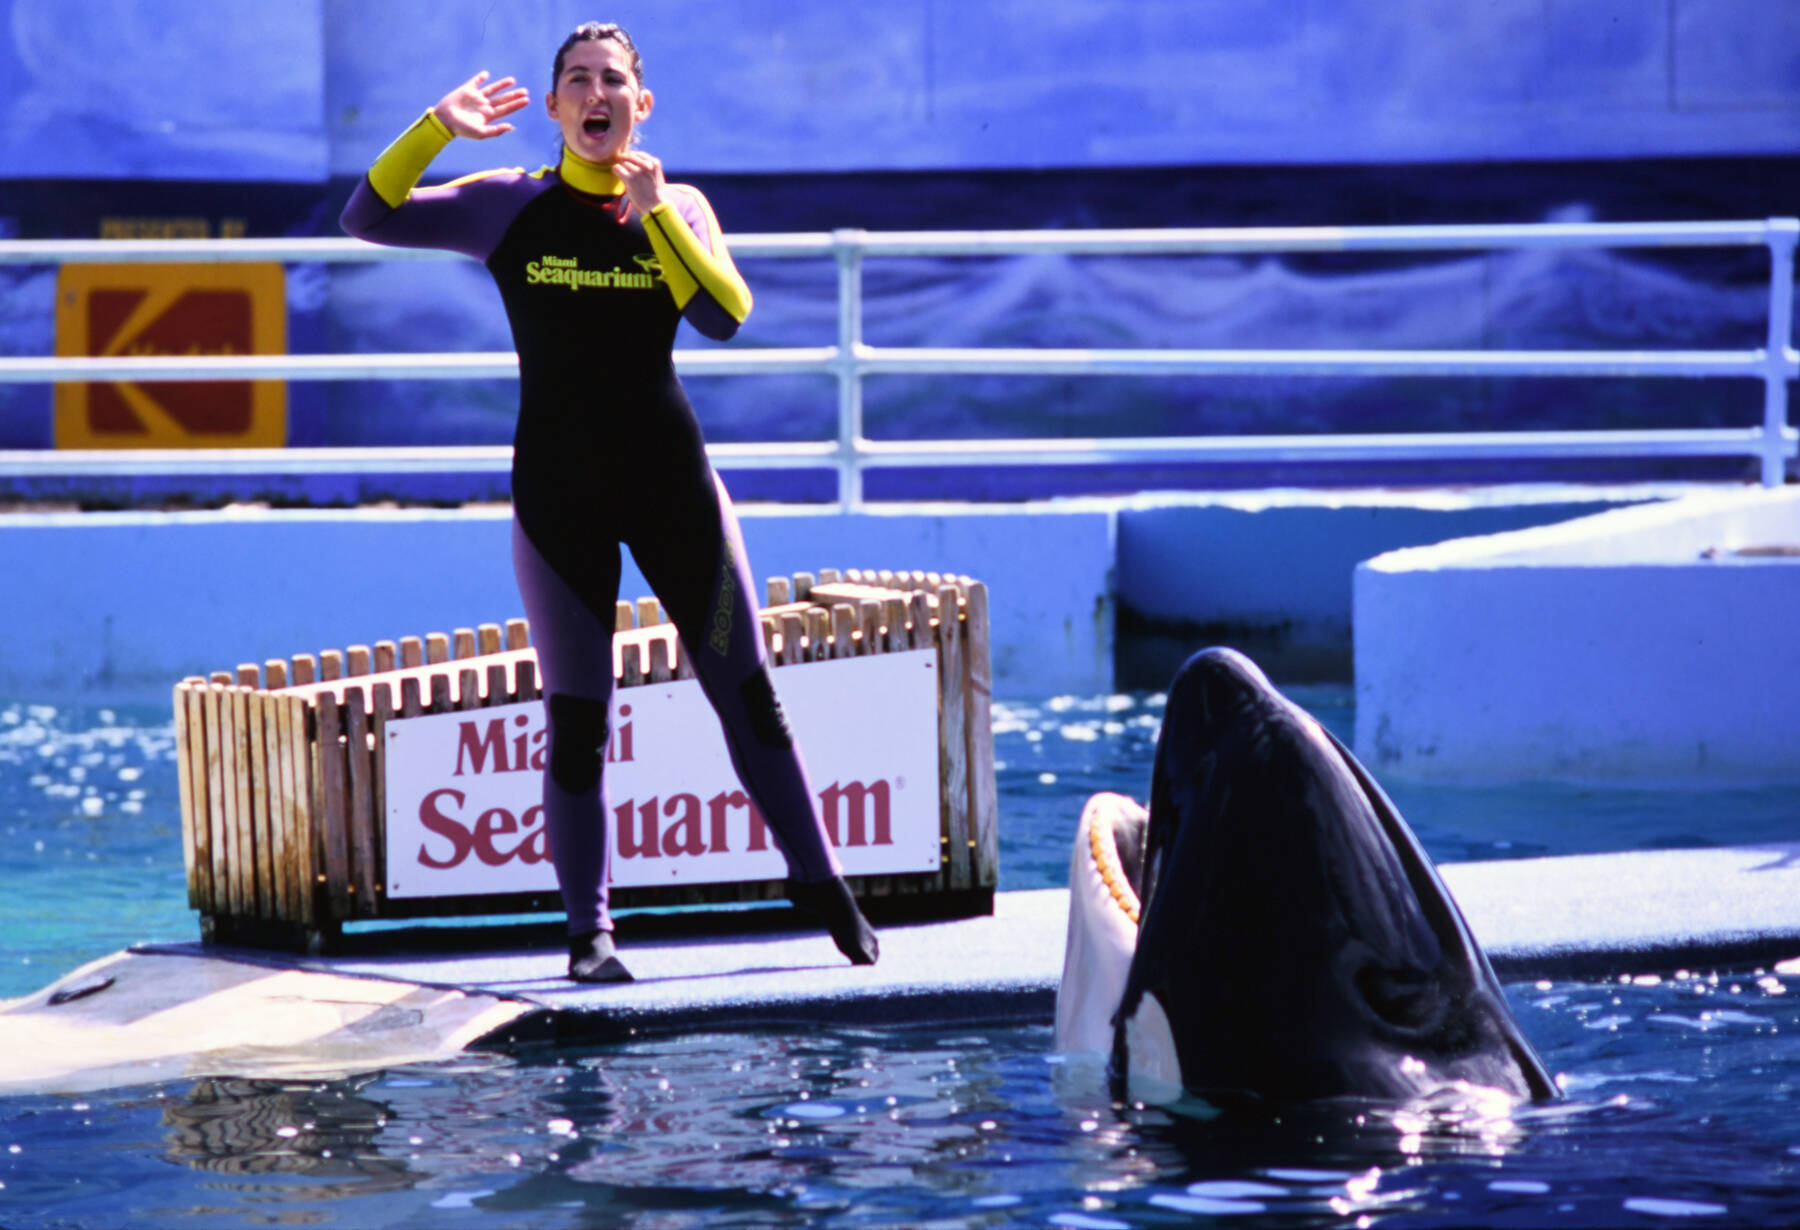 Photo by Ken Balcomb
Prior to her death Friday, August 18, Lolita entertained audiences for over five decades in a small pool at the Miami Seaquarium. Lolita, aka Tokitae, recently retired from show business and was actively preparing to return to the Pacific Northwest where she was born in the mid-1960s.